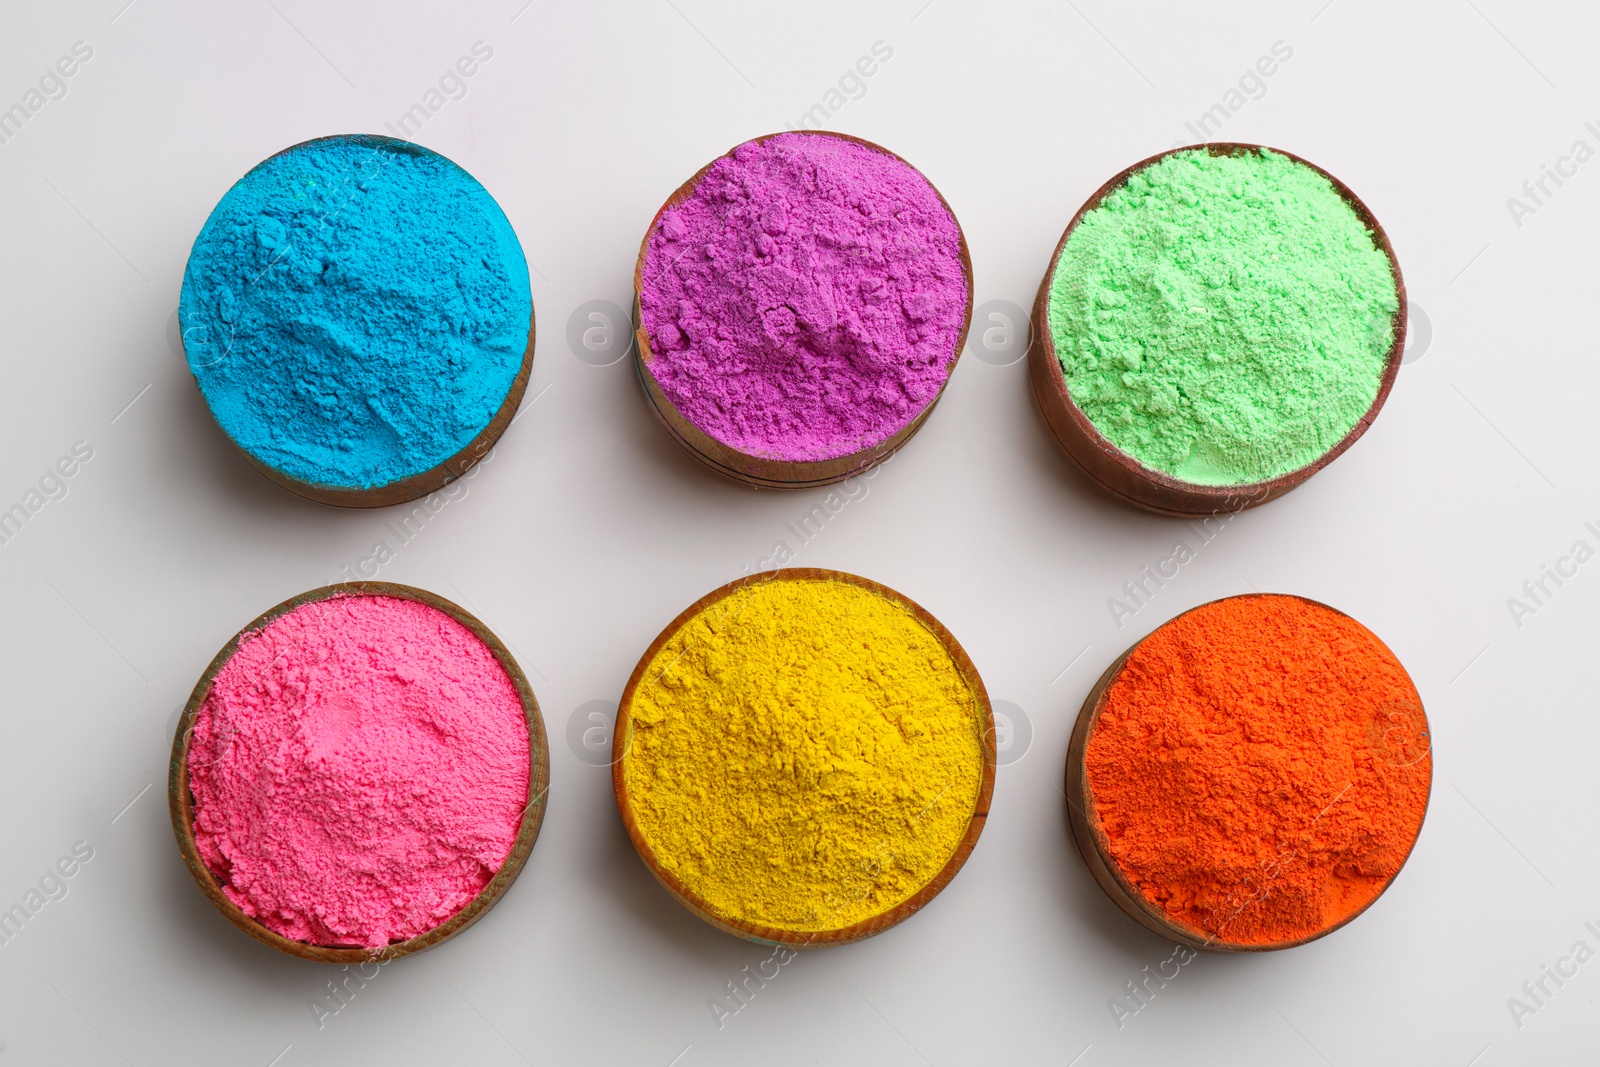 Photo of Colorful powders in bowls on light background, flat lay. Holi festival celebration